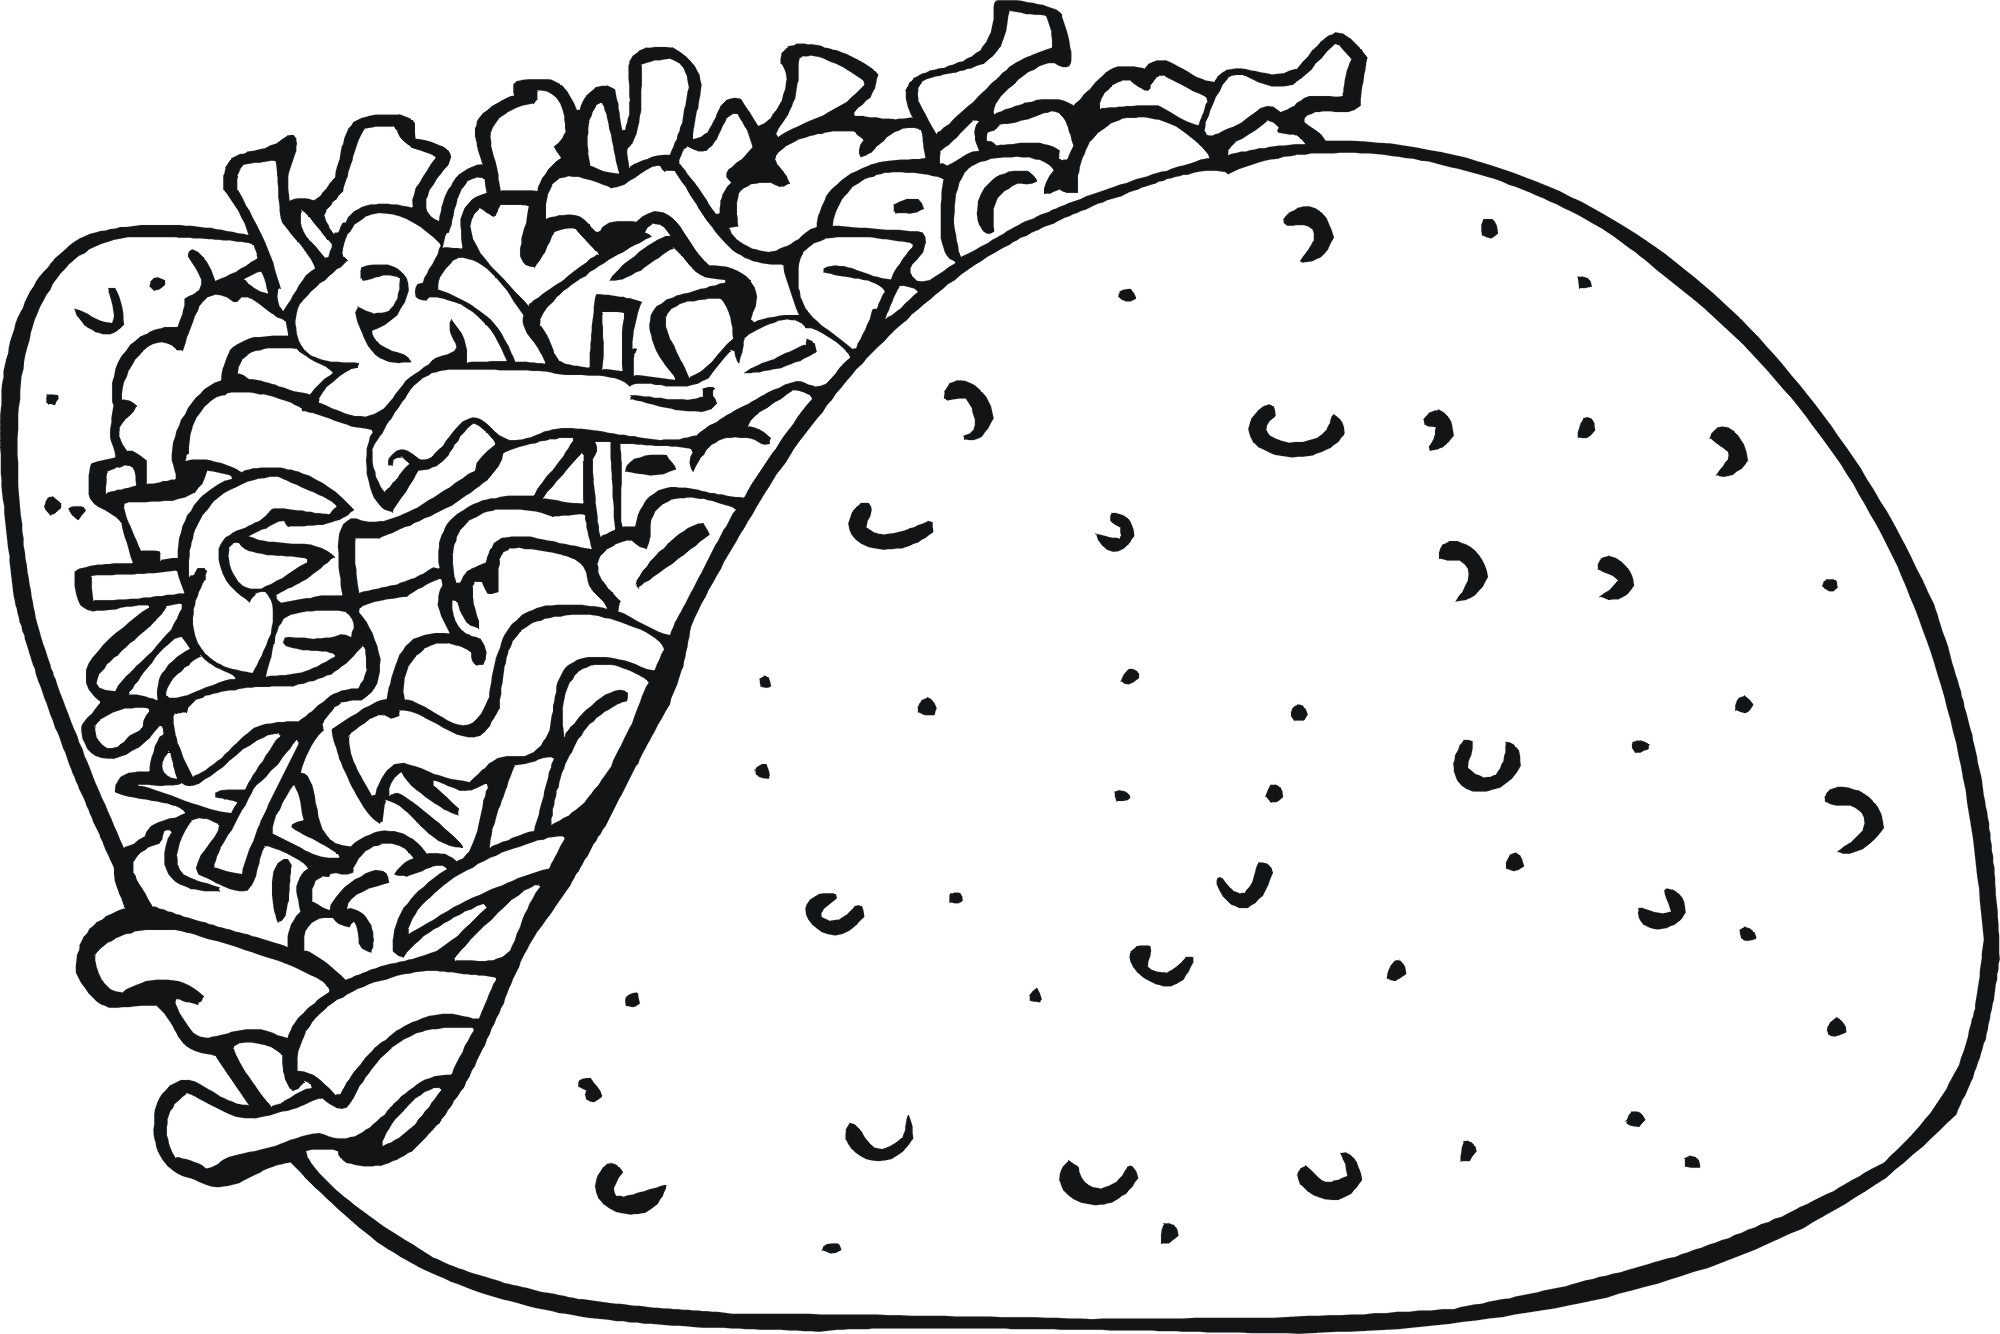 32 Dragons Love Tacos Coloring Pages - Free Printable Coloring Pages